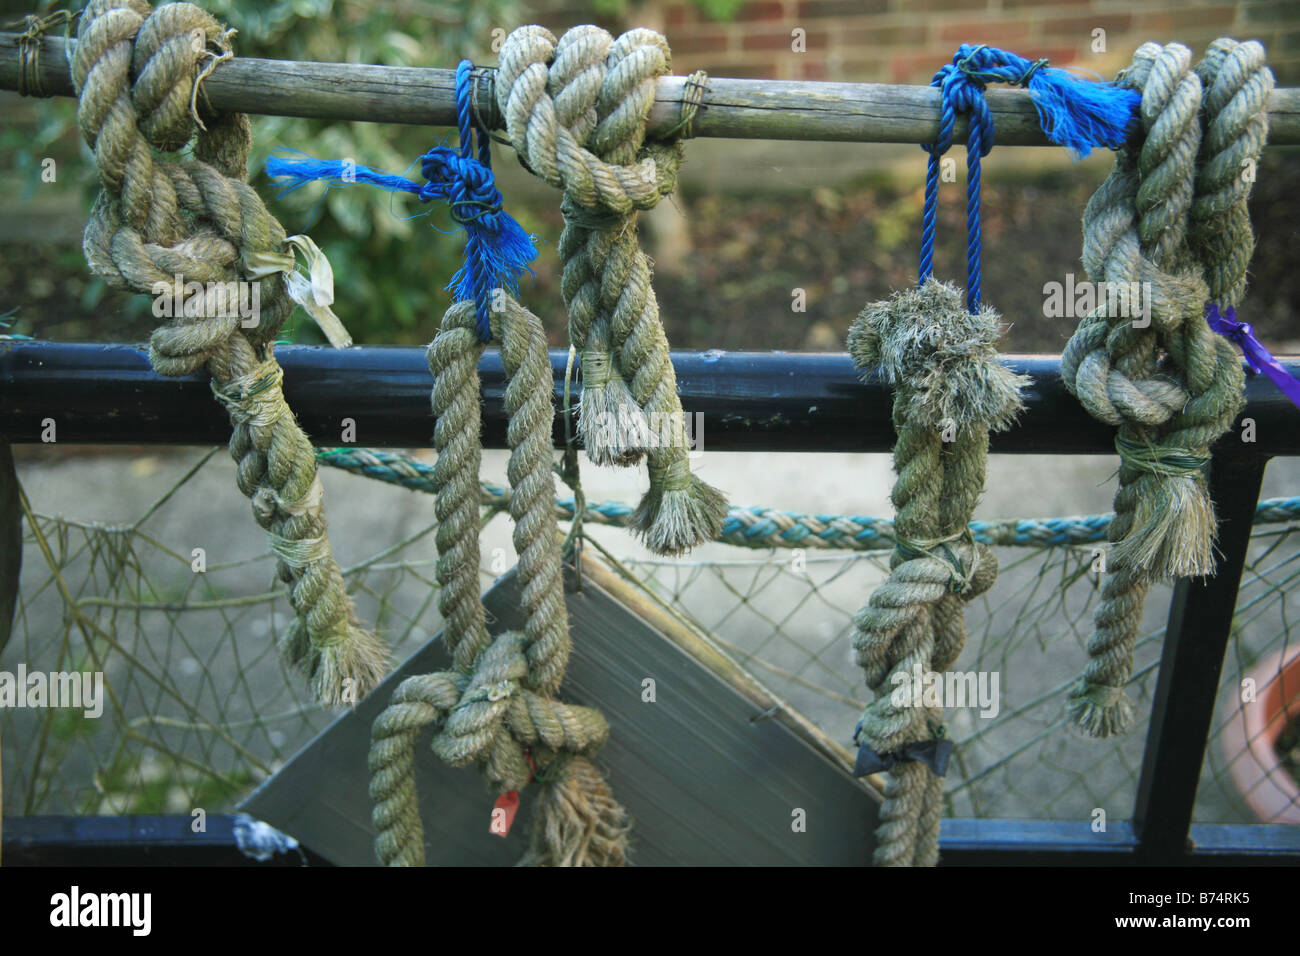 Rope with various fishermans knots on a railing Stock Photo